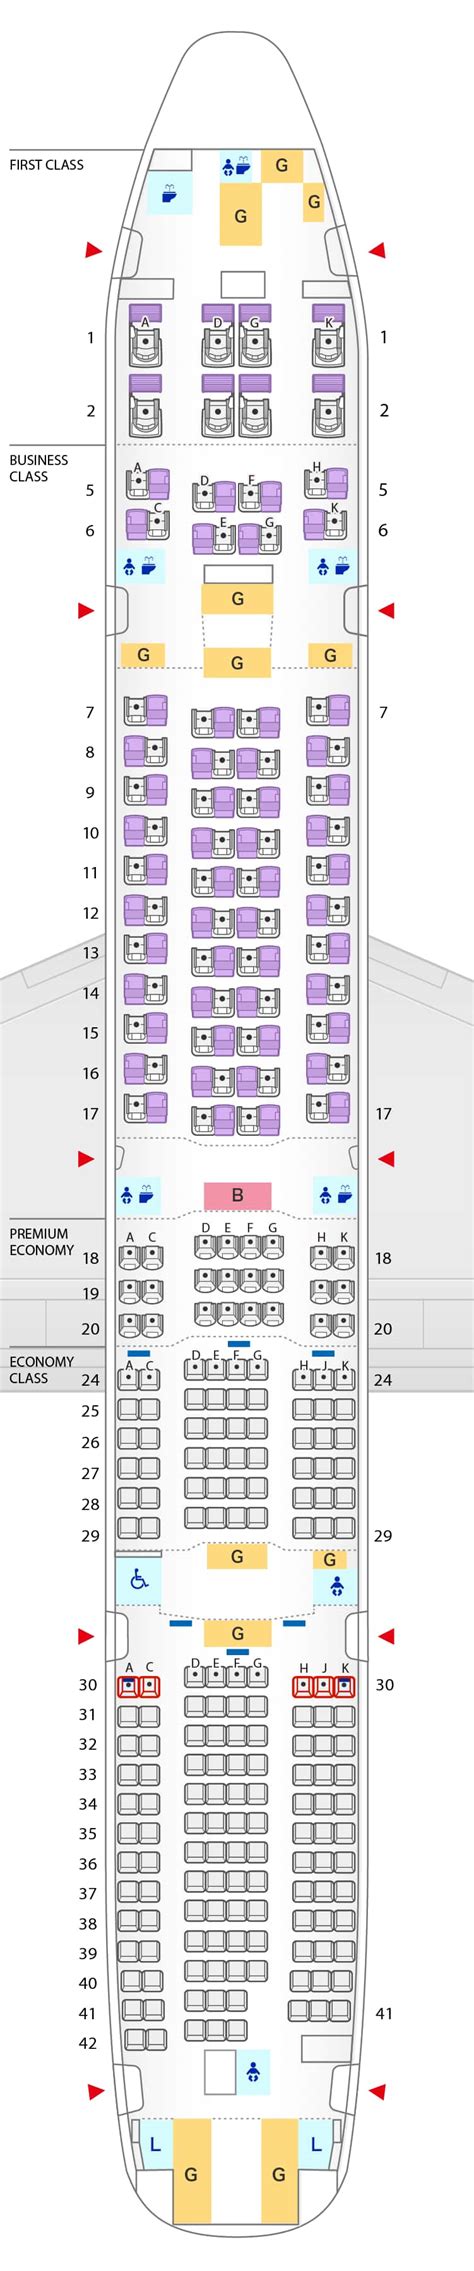 Delta Boeing 737 aircraft seat map. Delta Air Lines